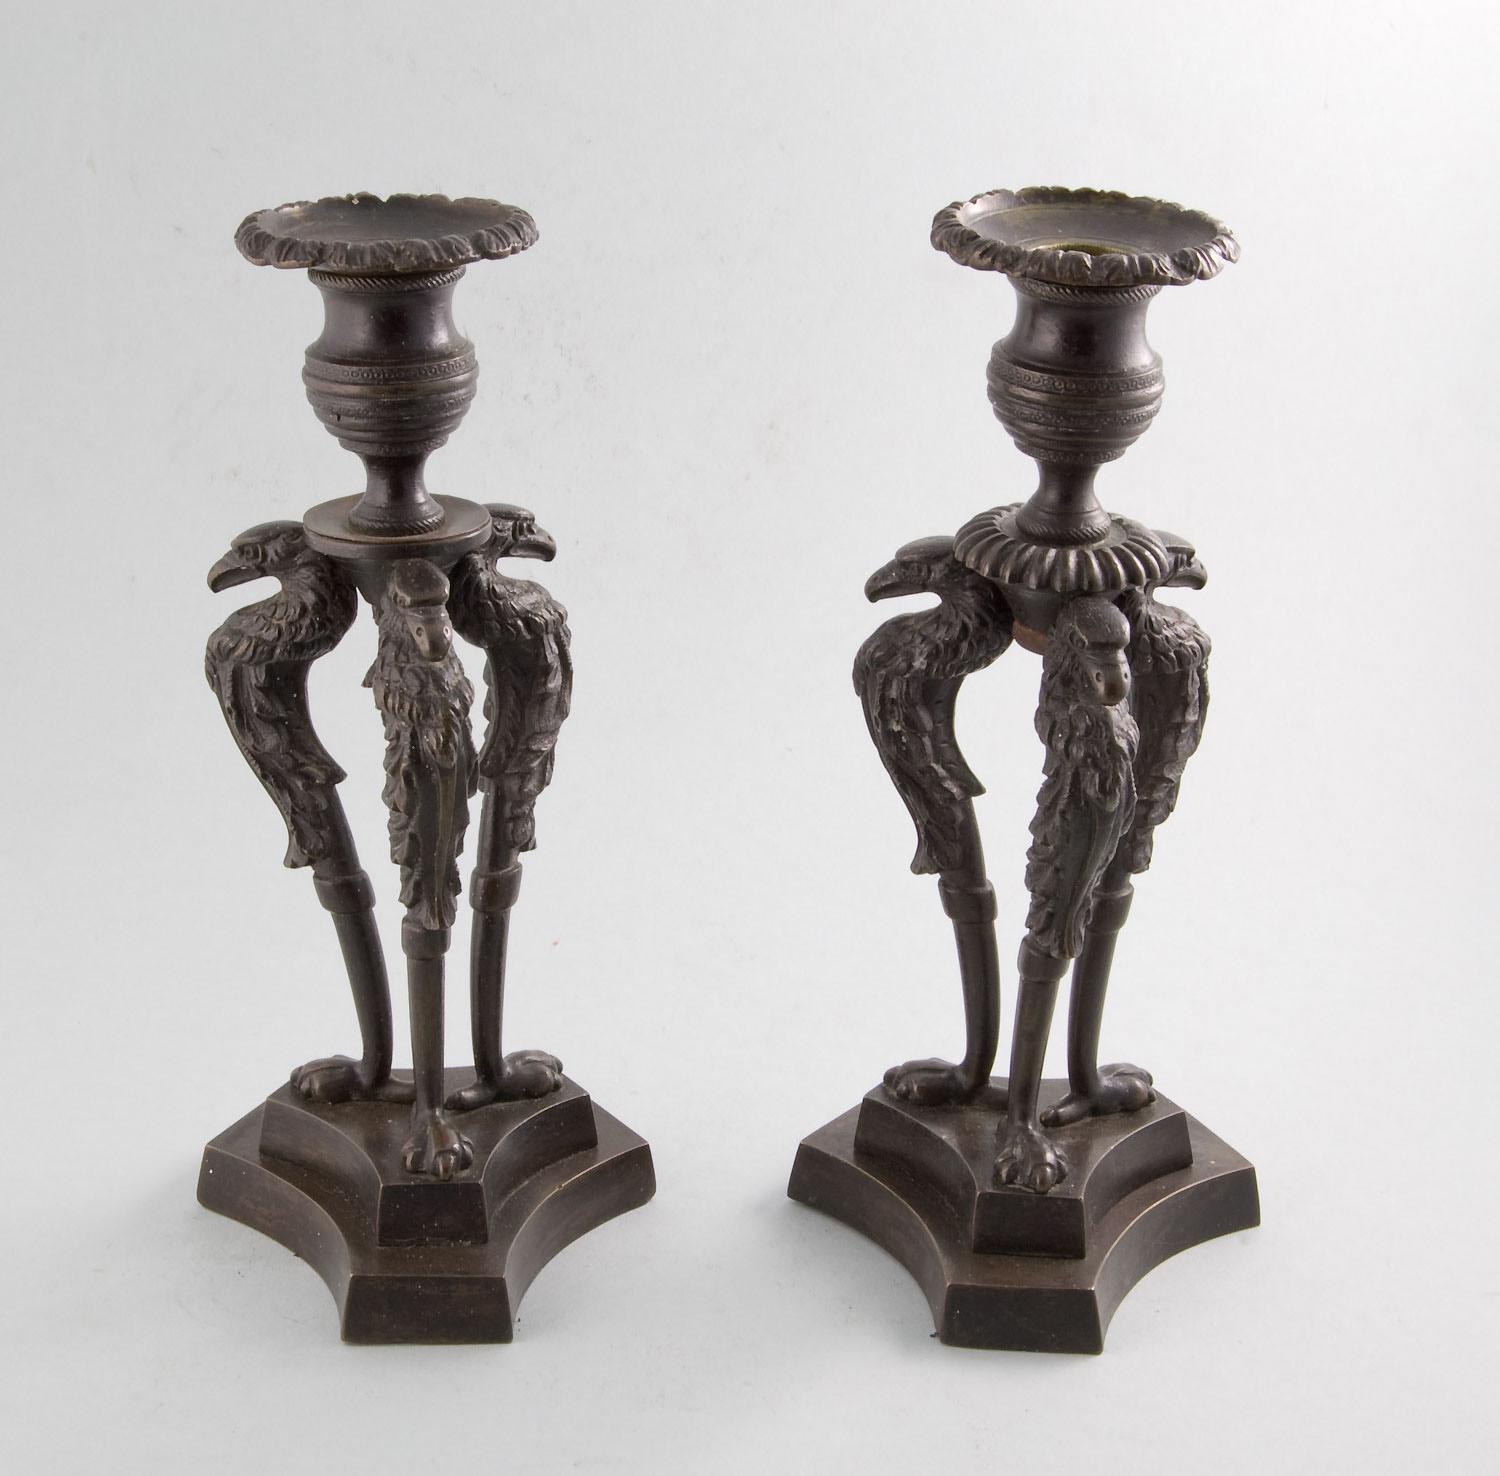 English Regency candlesticks in patinated bronze In Good Condition For Sale In London, GB